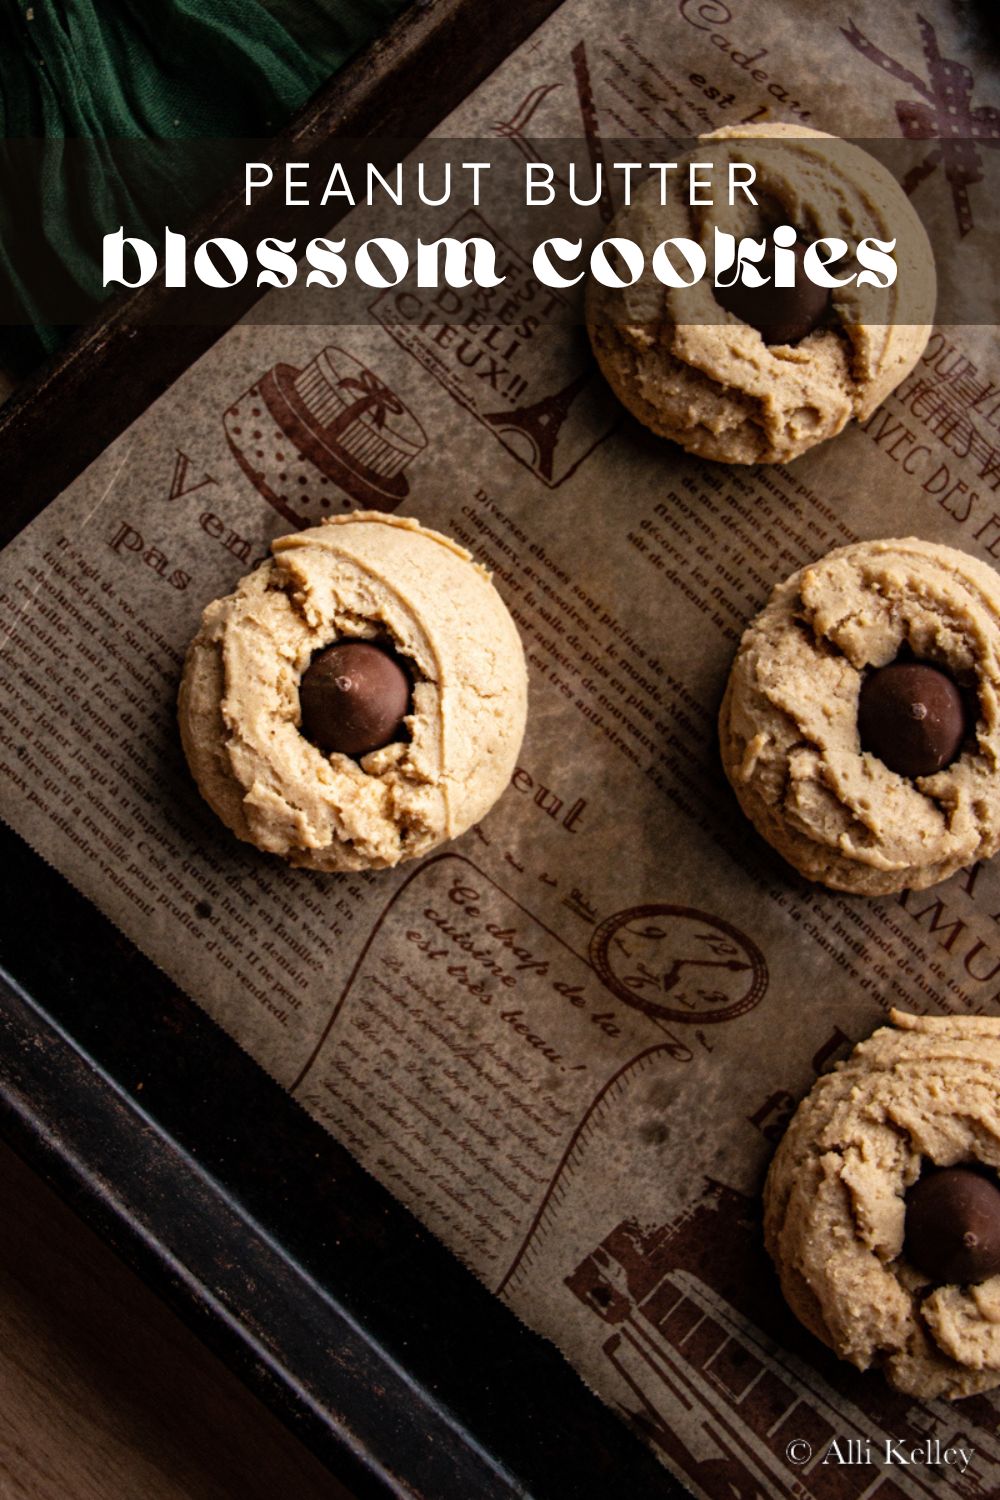 These soft peanut butter cookies are easy to make, soft, and delicious!! Every bite packed with peanut butter flavor, topped with chocolate chips to make them extra special. #baking #bakingcookies #cookies #peanutbutter #peanutbuttercookies #chocolateandpeanutbutter #chocolatepeanut #easycookies #easyrecipe #easypeanutbuttercookies #softcookies #softpeanutbuttercookies